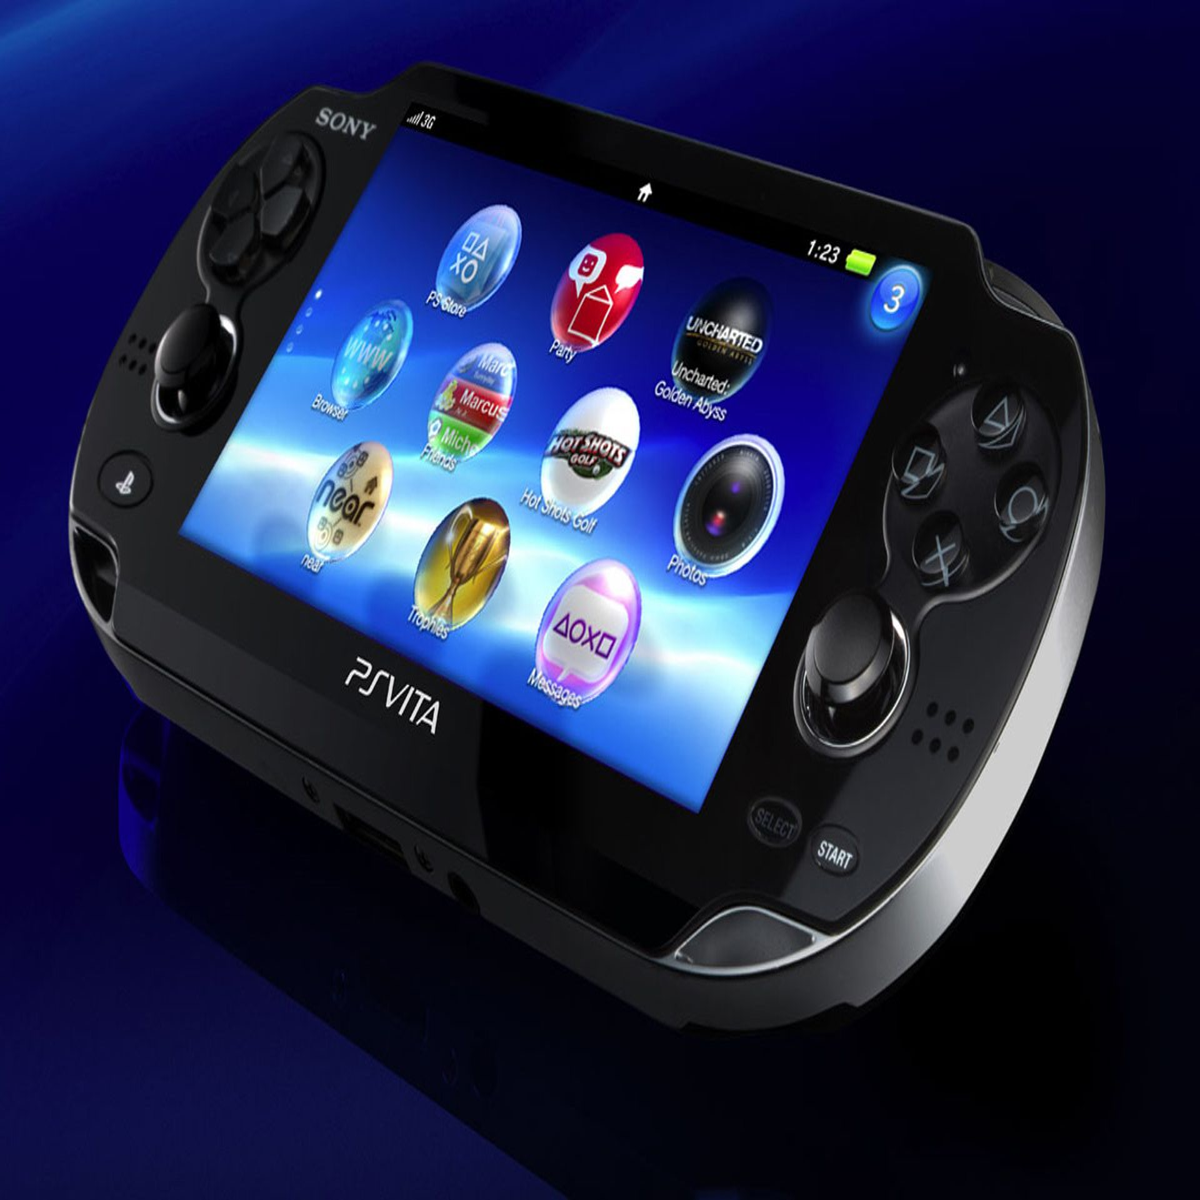 How to Play Music on a PS Vita Game Console